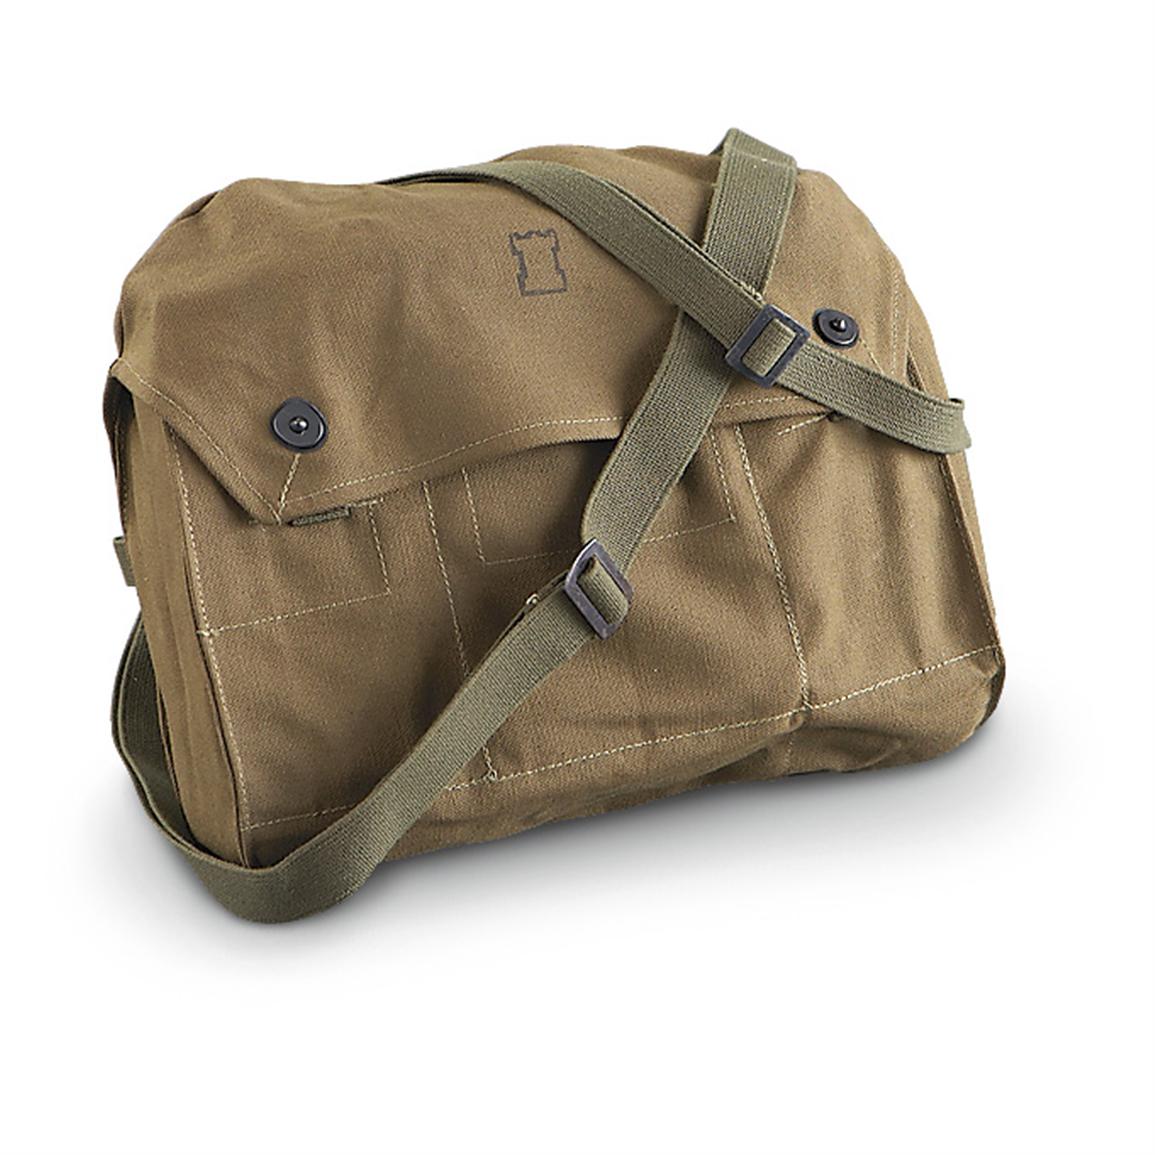 Finnish Military Surplus Shoulder Bags, 2 Pack, Used - 220906, Military Messenger Bags at ...